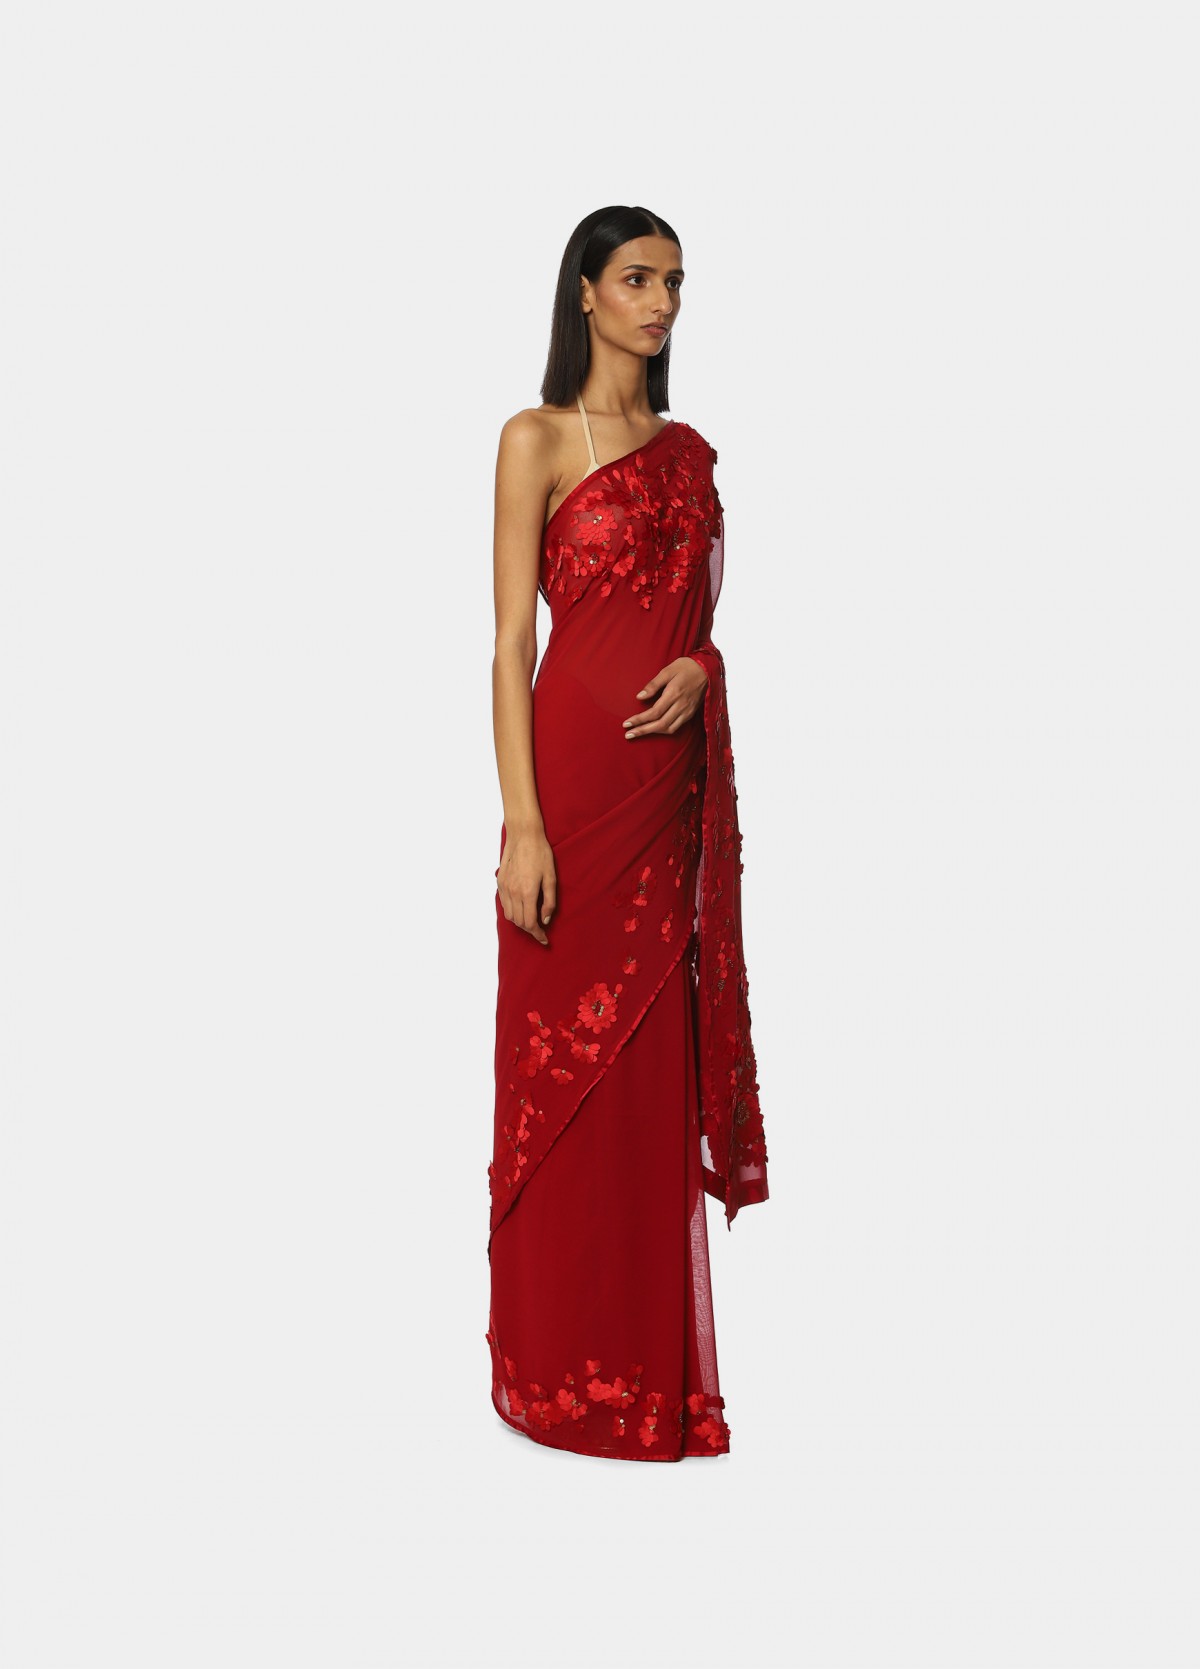 The Embroidered Georgette Moonlight Saree